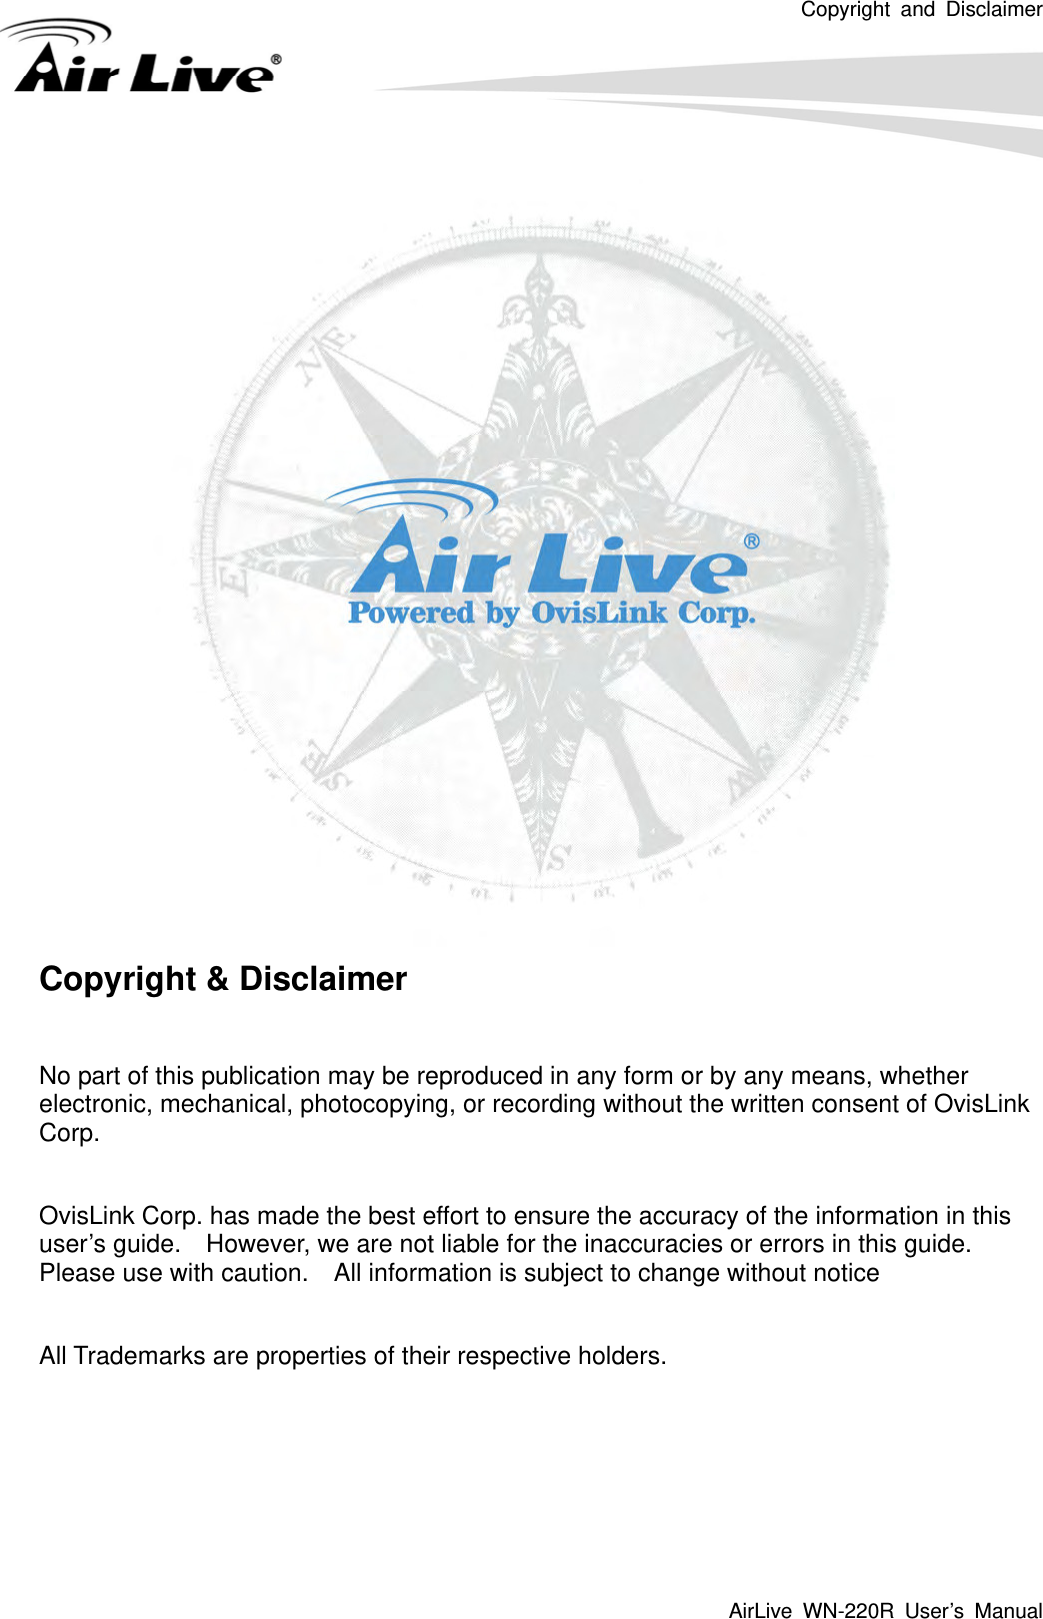 Copyright and Disclaimer AirLive WN-220R User’s Manual      Copyright &amp; Disclaimer  No part of this publication may be reproduced in any form or by any means, whether electronic, mechanical, photocopying, or recording without the written consent of OvisLink Corp.   OvisLink Corp. has made the best effort to ensure the accuracy of the information in this user’s guide.    However, we are not liable for the inaccuracies or errors in this guide.   Please use with caution.    All information is subject to change without notice  All Trademarks are properties of their respective holders.     